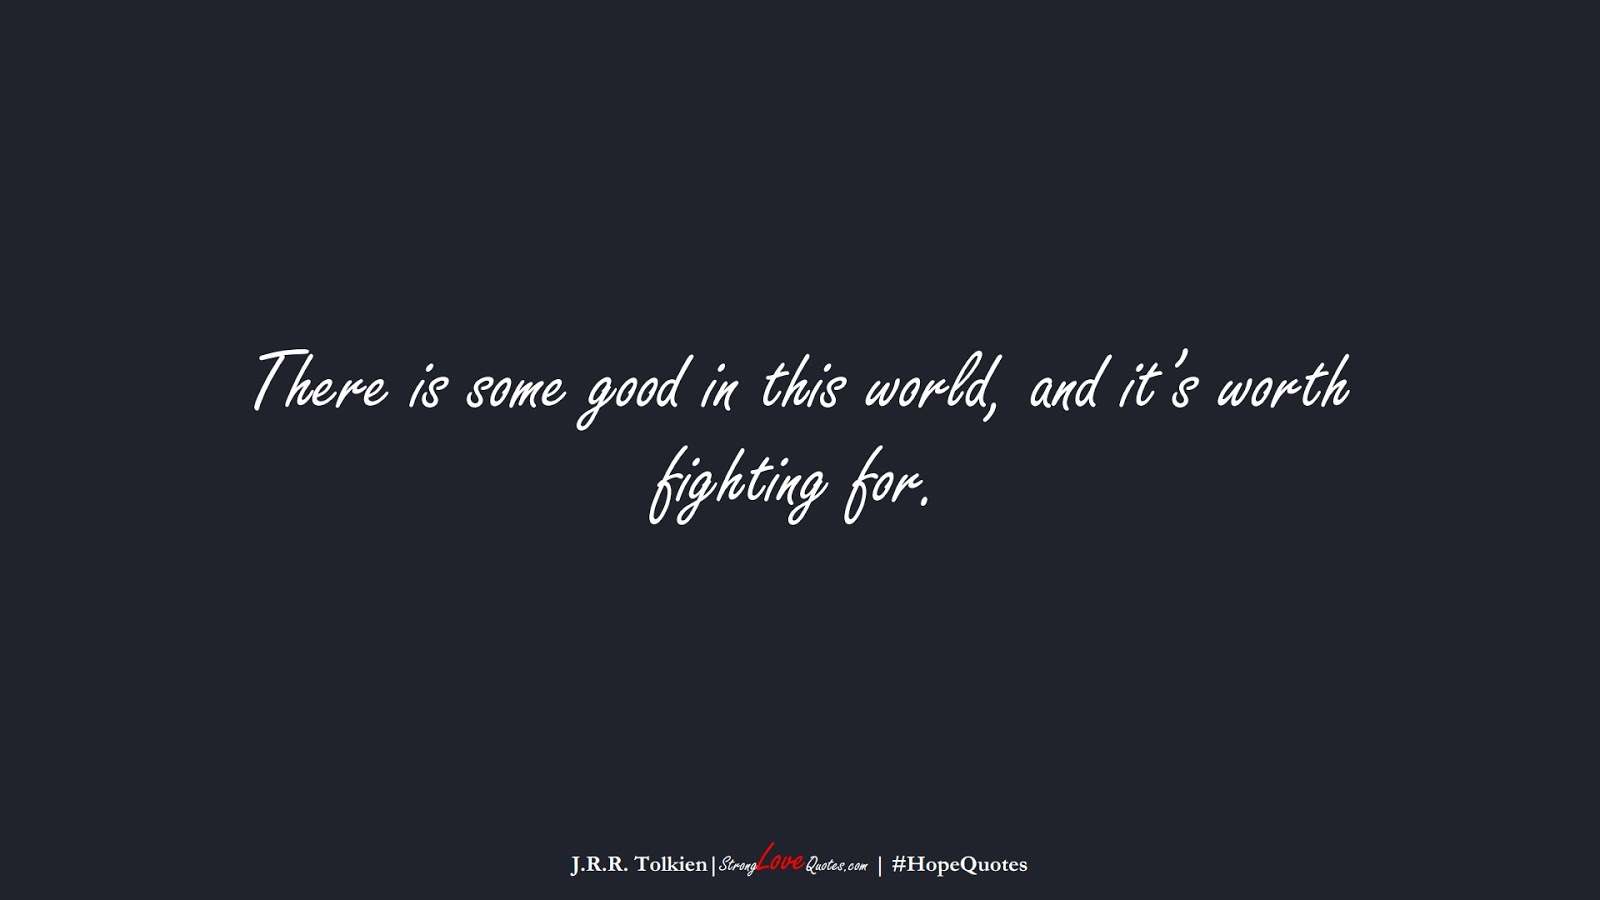 There is some good in this world, and it’s worth fighting for. (J.R.R. Tolkien);  #HopeQuotes